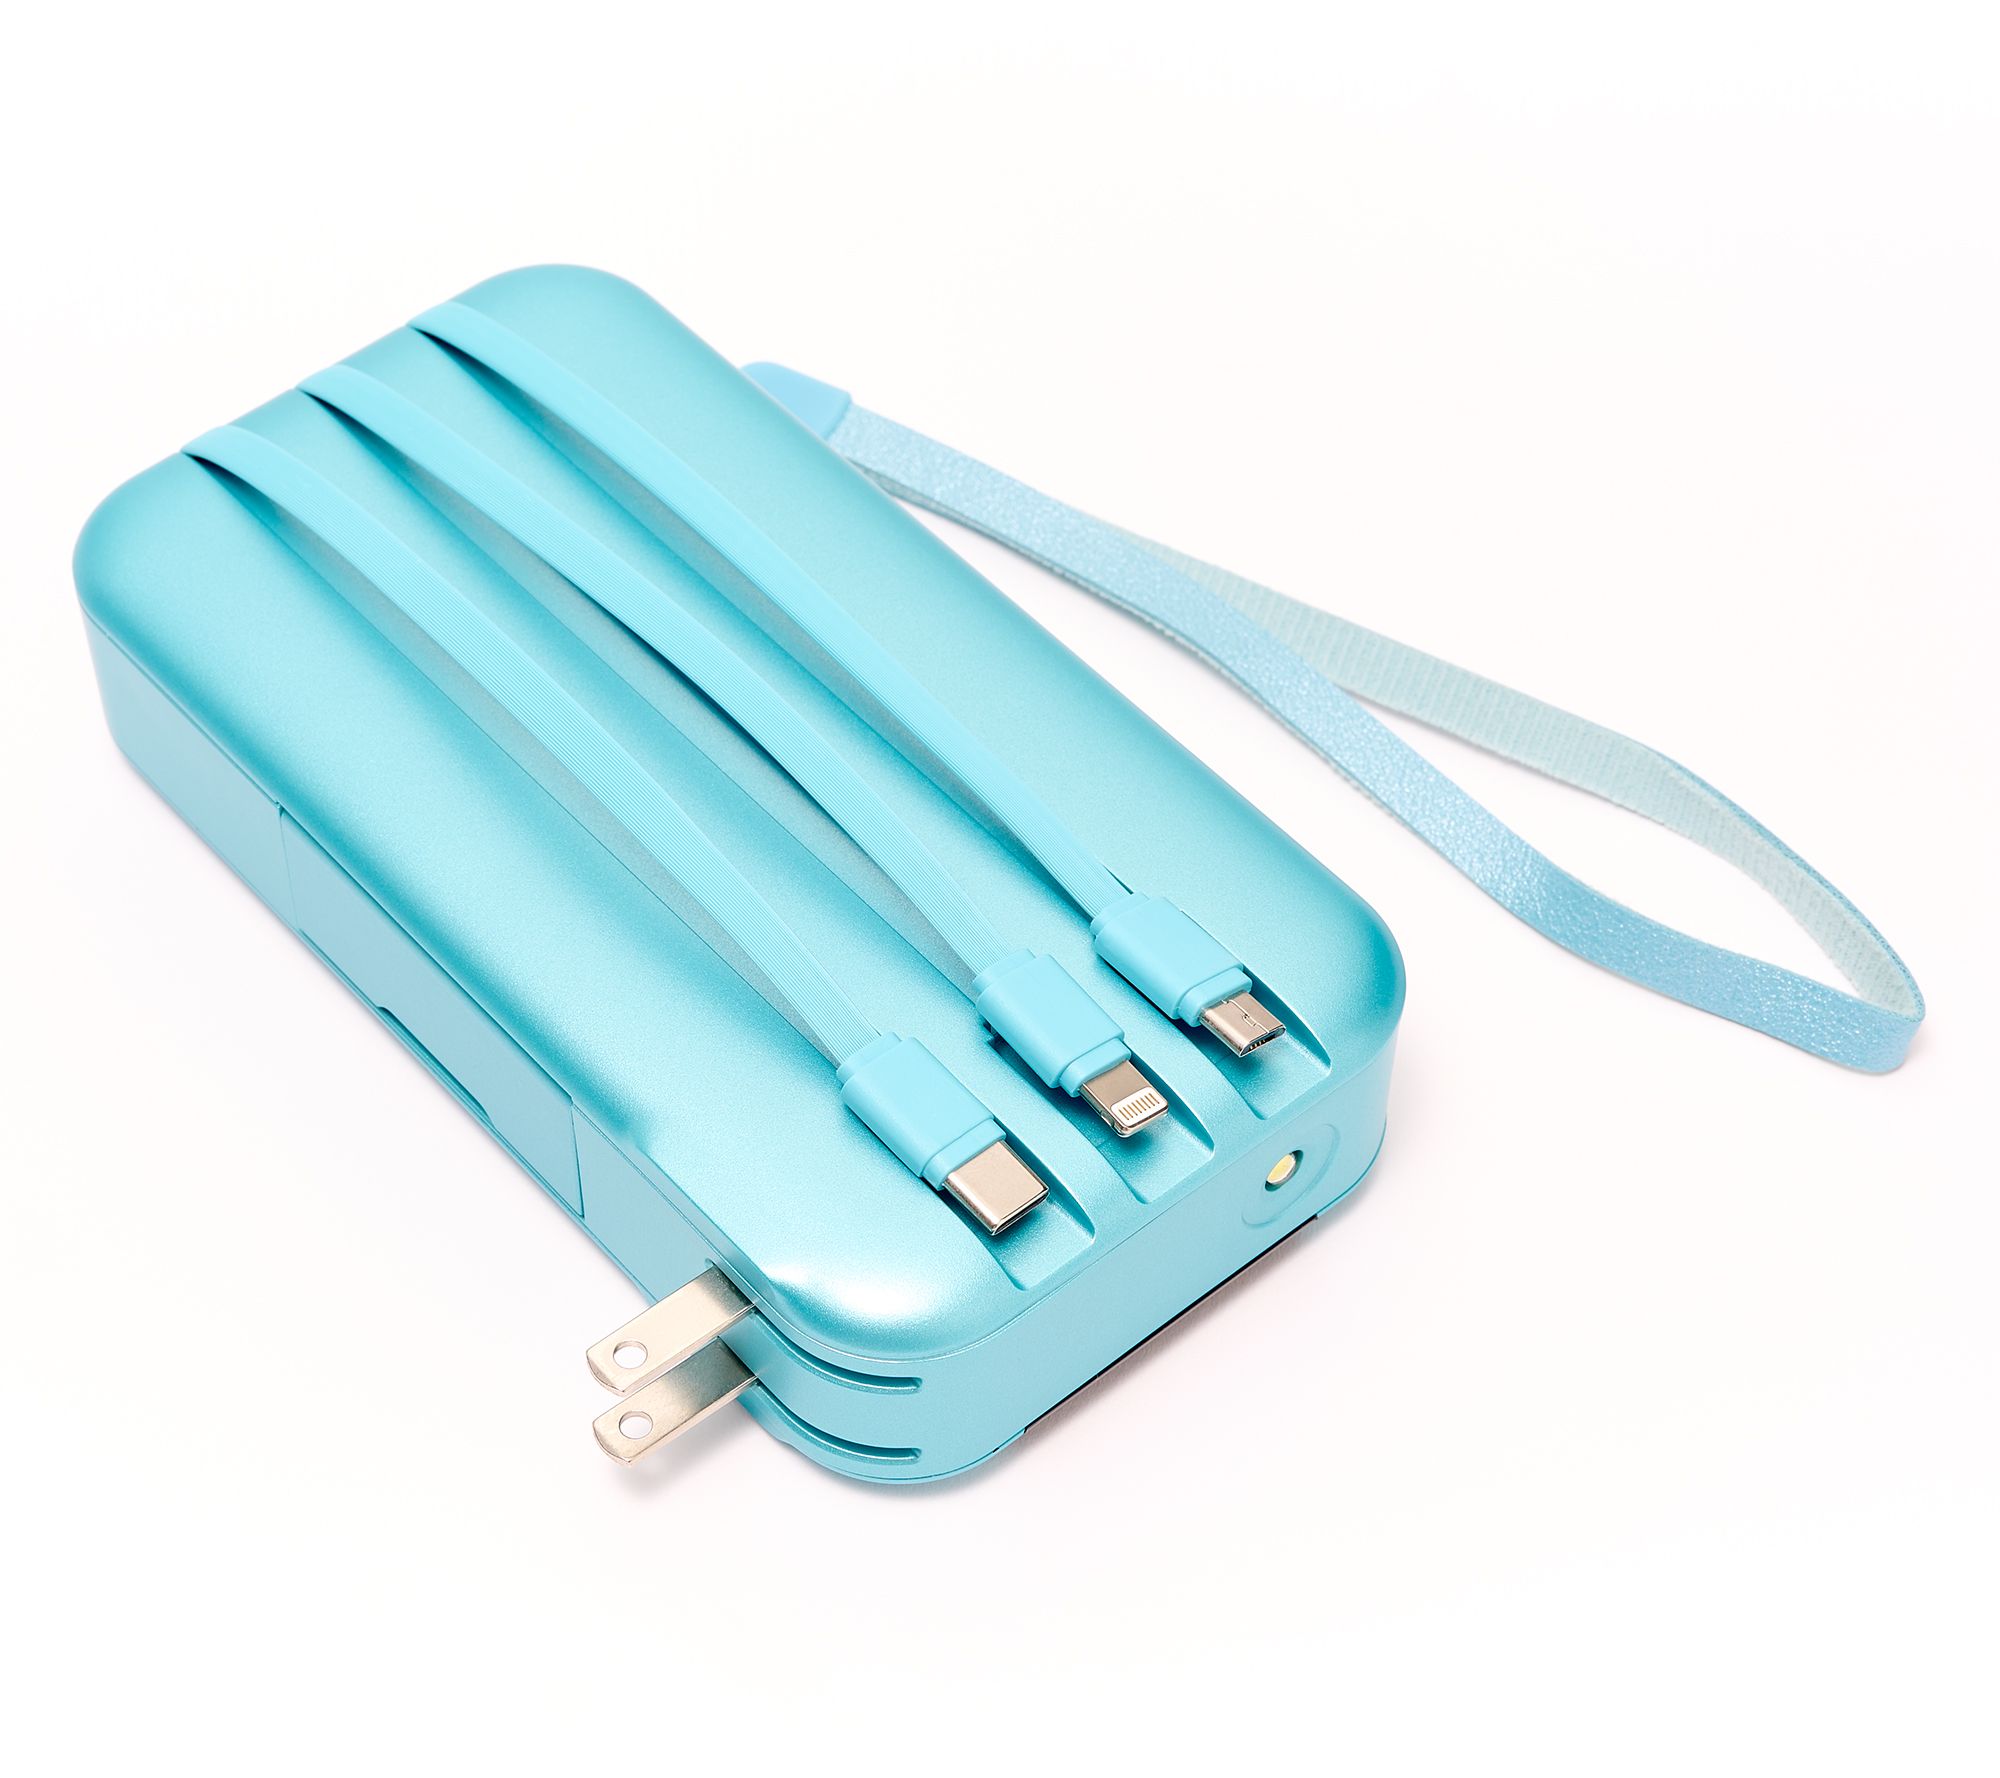 Limitless 15,000mAh Power Bank with AC Plug, Cables & Carrying Case 